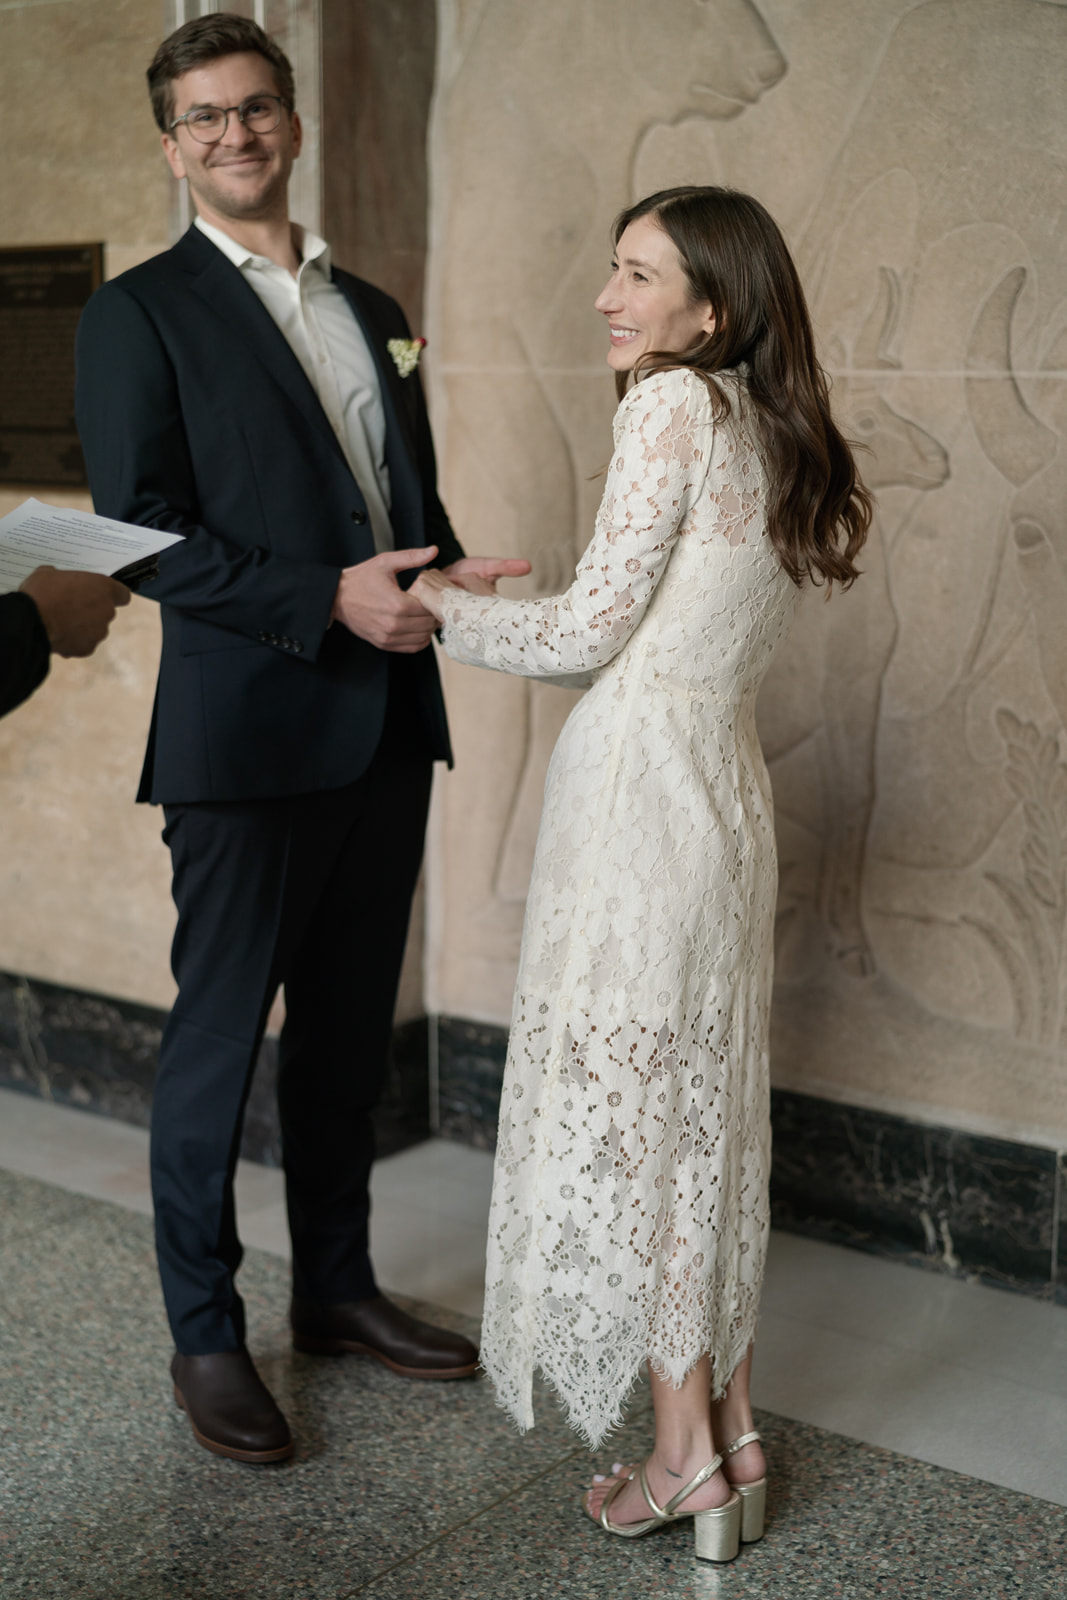 Denver Colorado Elopement at the City and County Building